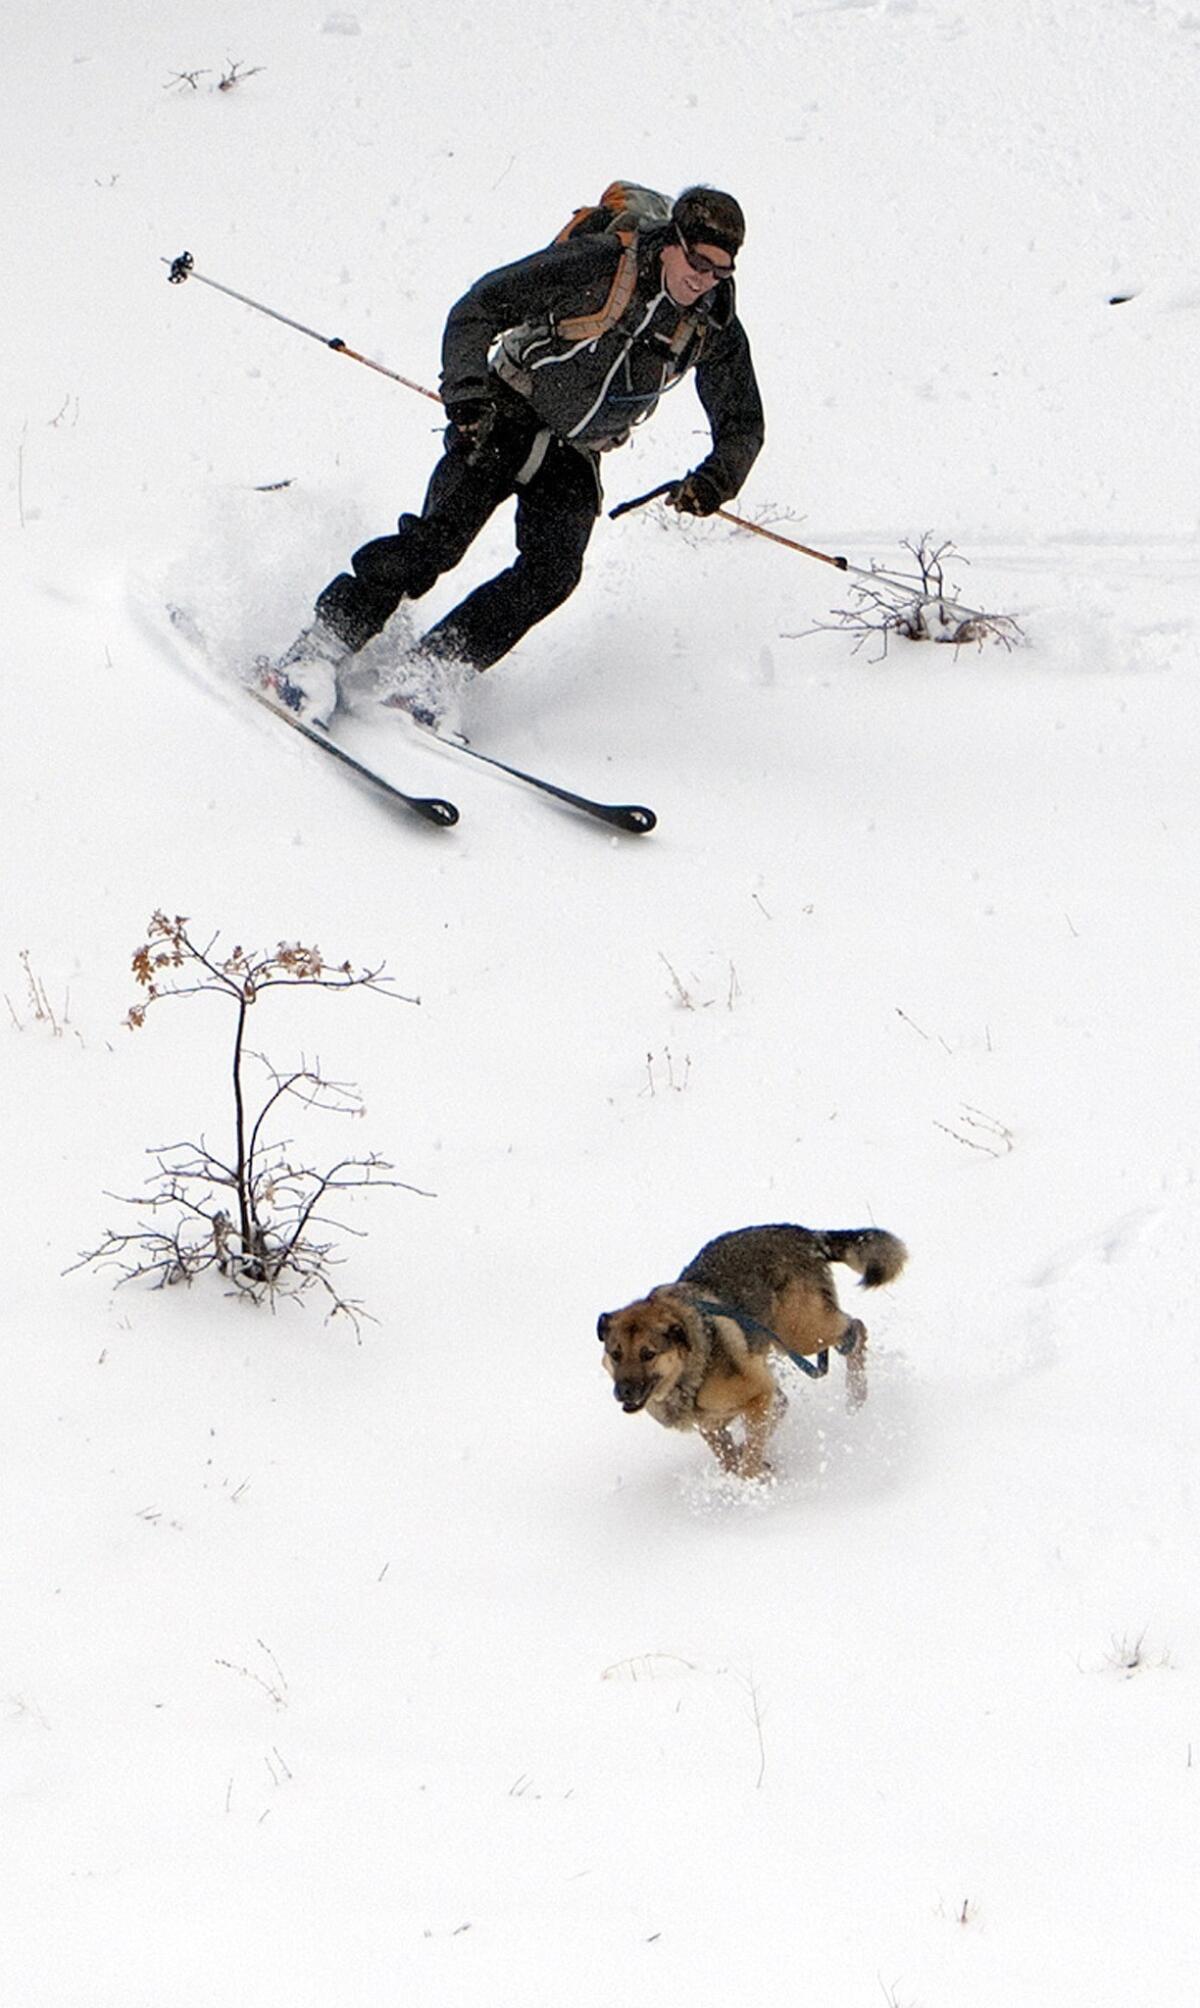 Chris Rusay of Eagle Rock with his dog Wyatt skis down a backcountry slope off Highway 2 in Wrightwood.